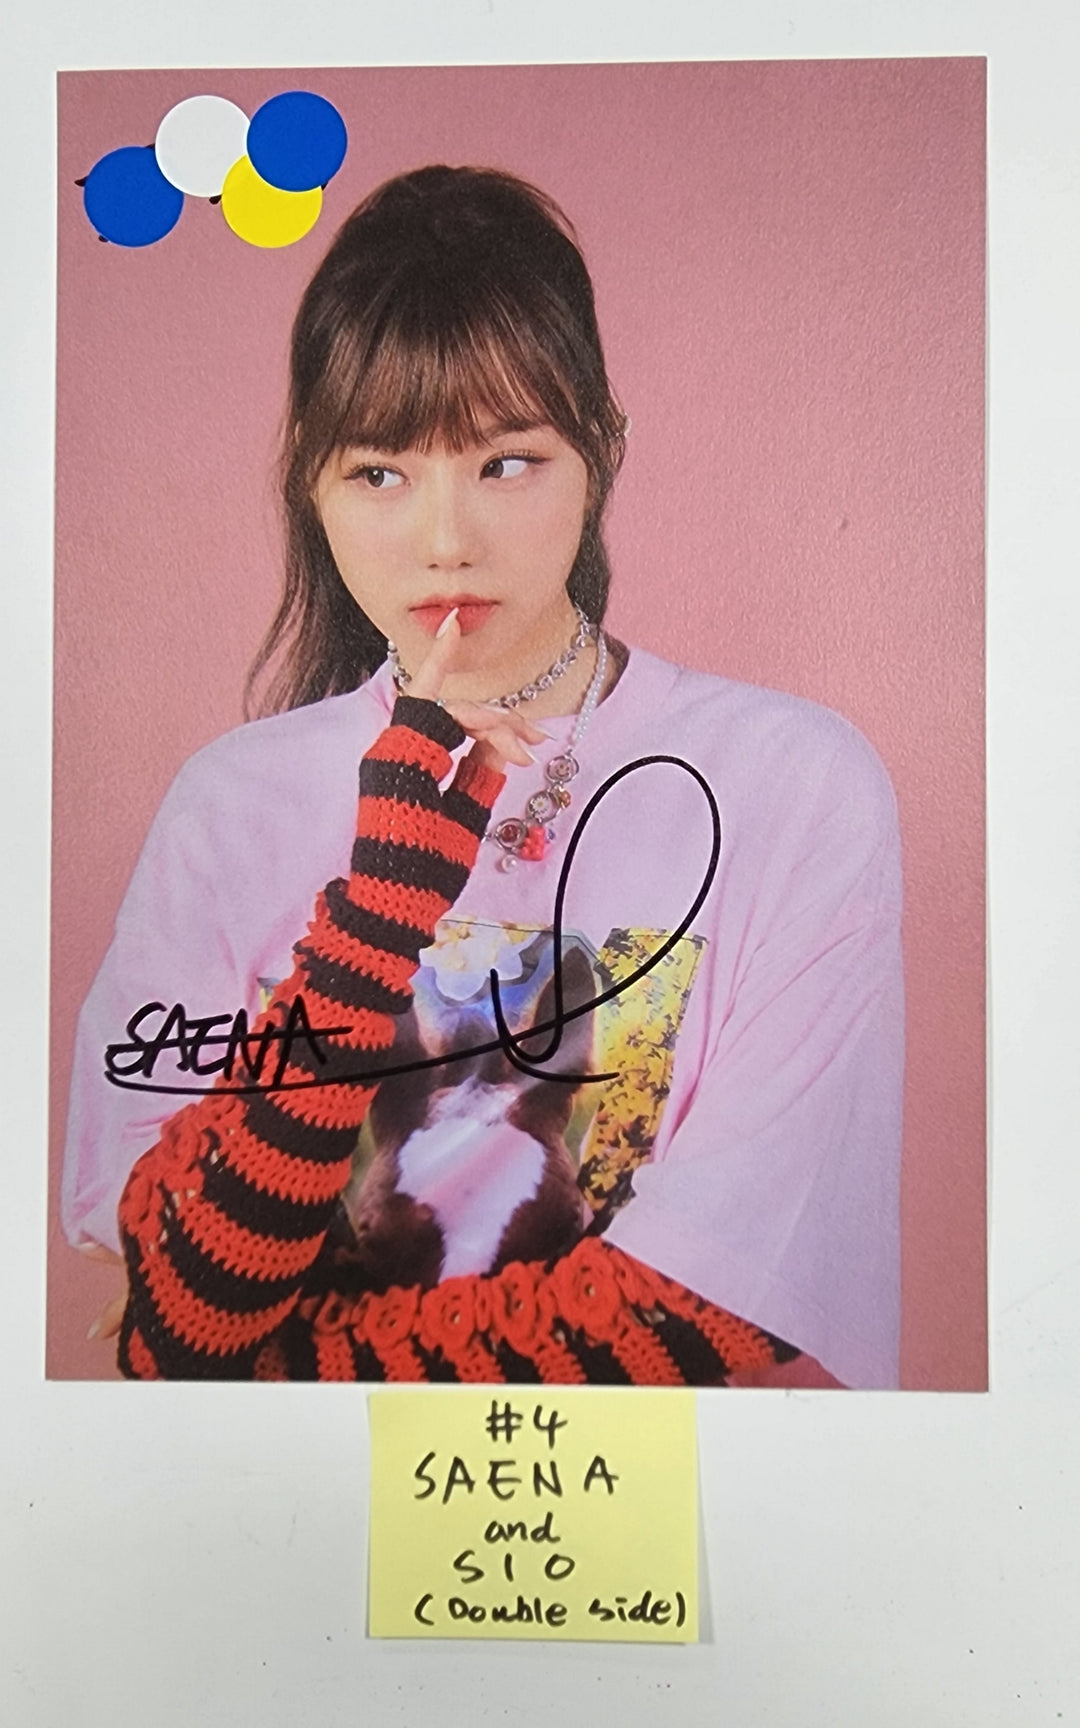 FIFTY FIFTY "THE FIFTY" 1st EP  - A Cut Page From Fansign Event Album